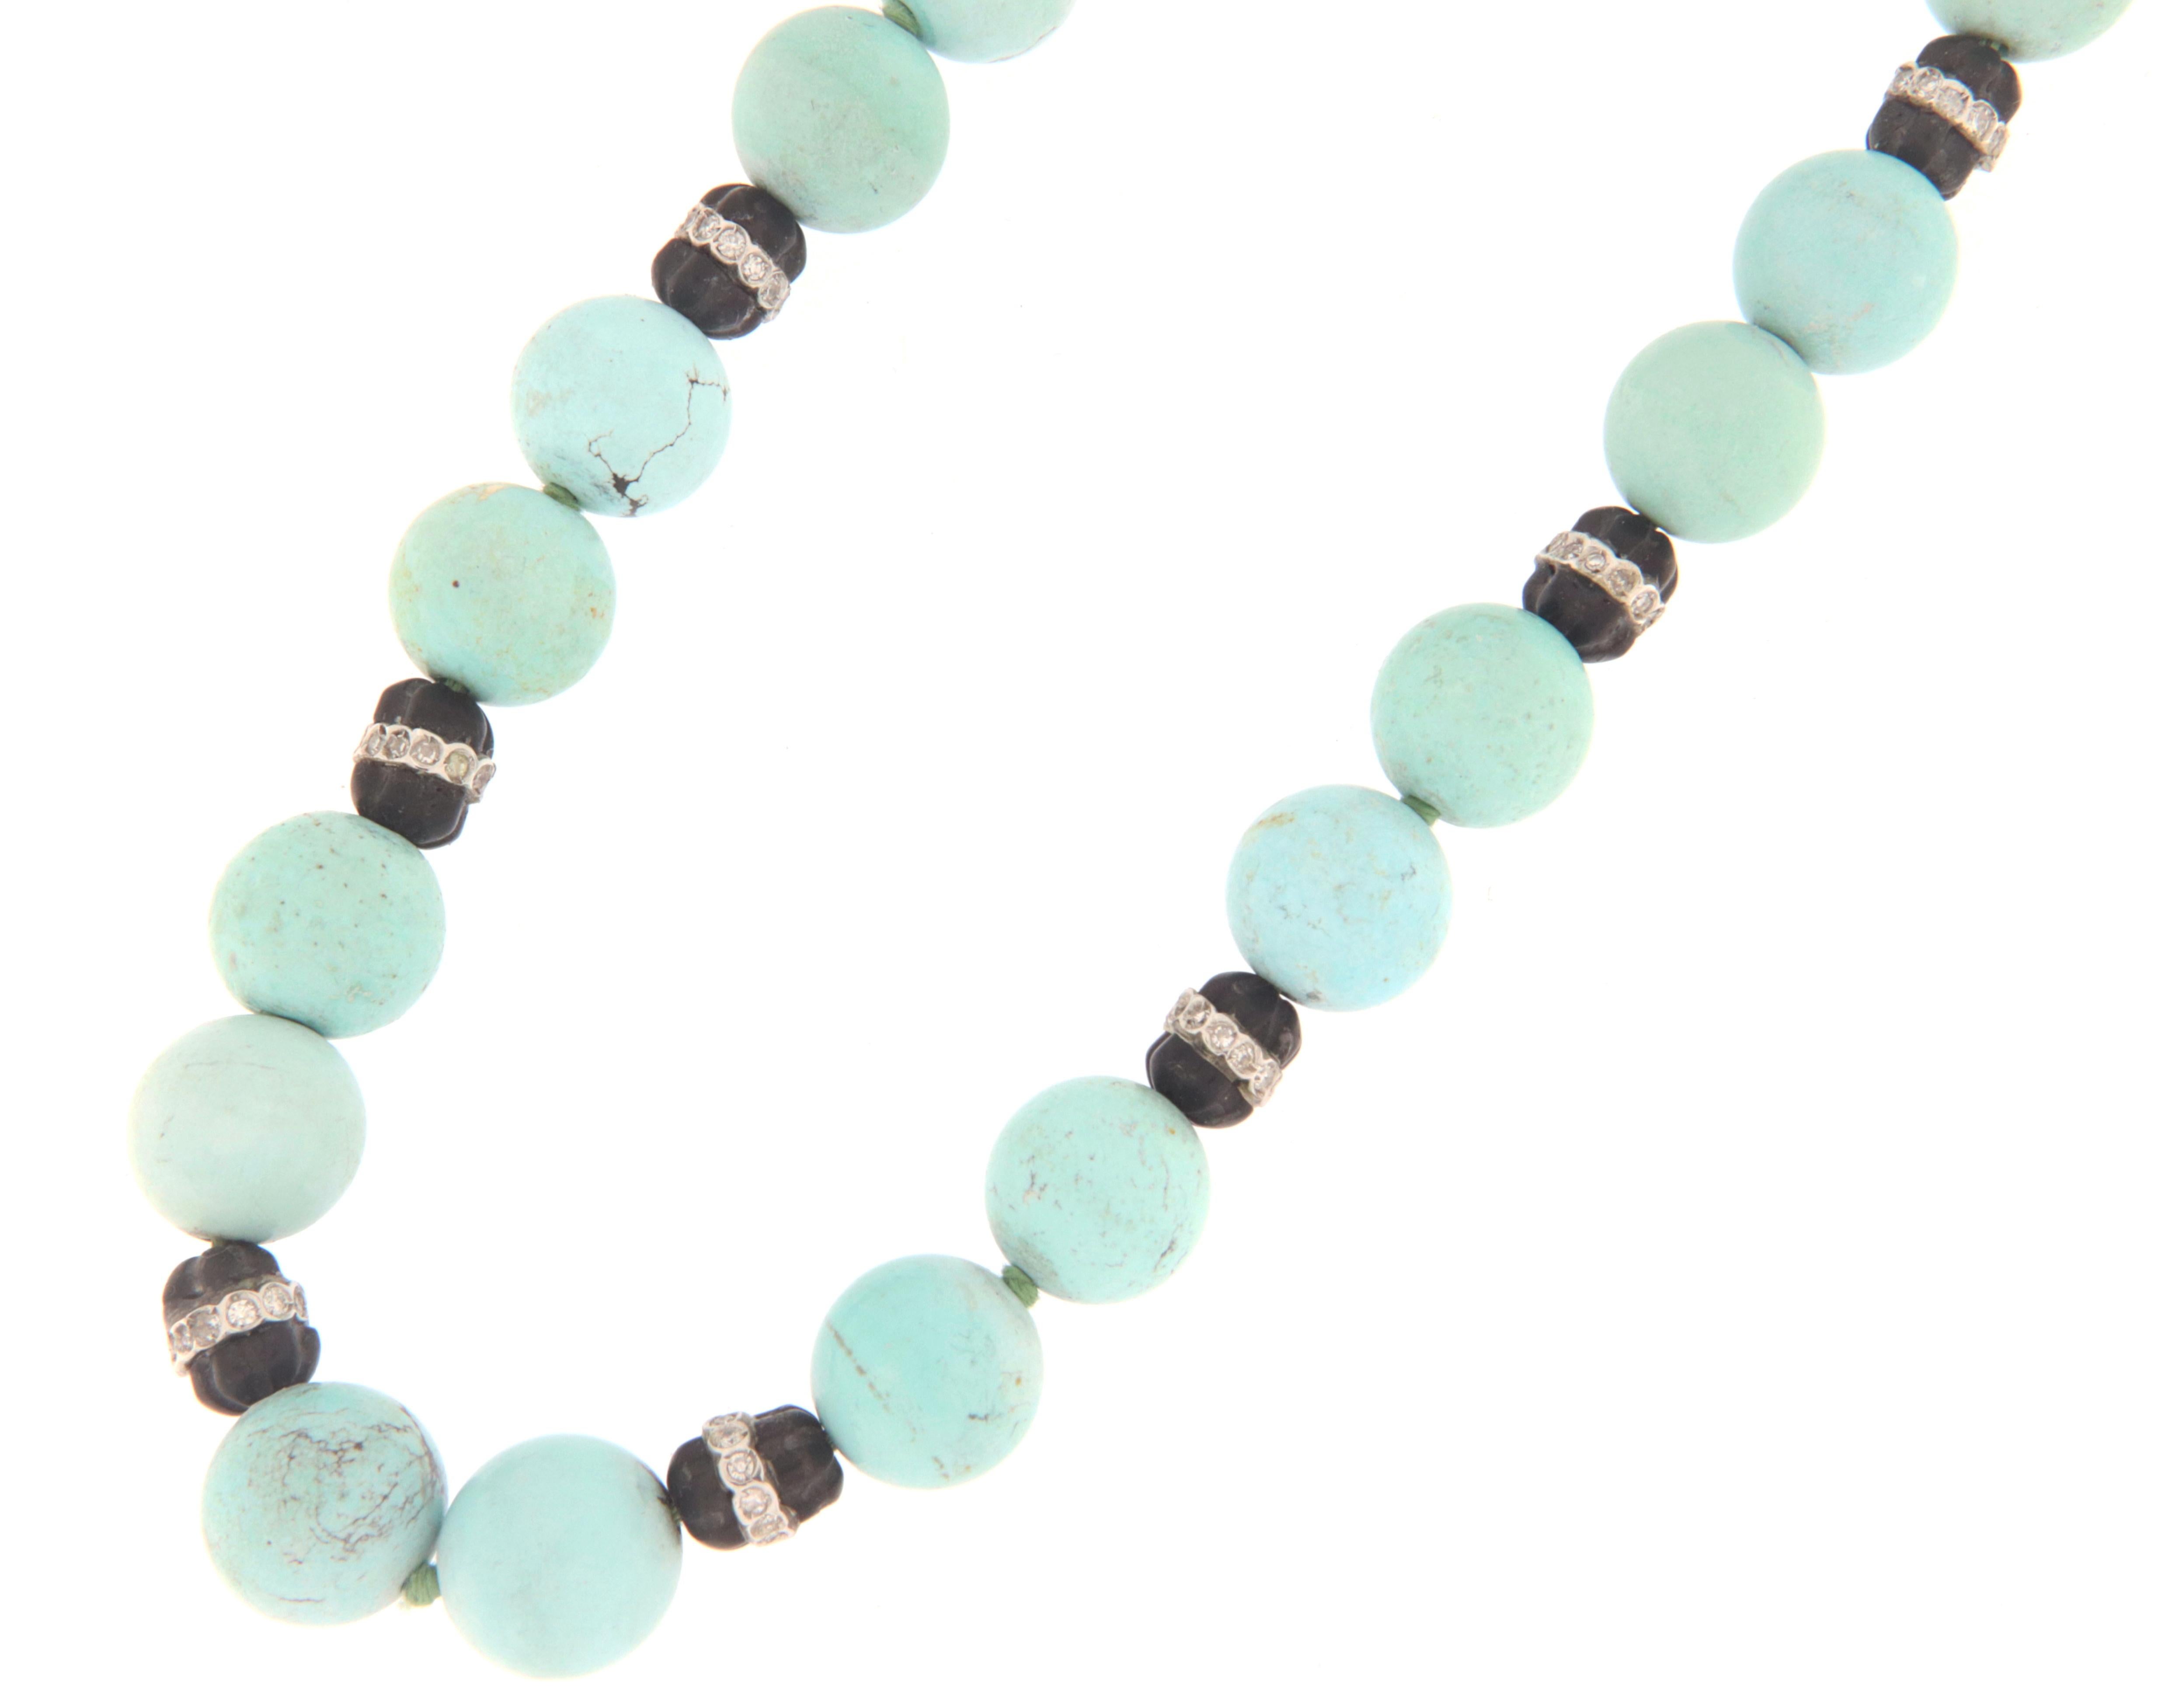 18 karat white gold beaded necklace. Handmade by our artisans assembled with turquoise beaded,onyx and diamonds.

Necklace total weight 56.60 grams
Diamonds weight 1.50 karat
Turquoise single ball 12 mm
Necklace length 48 cm